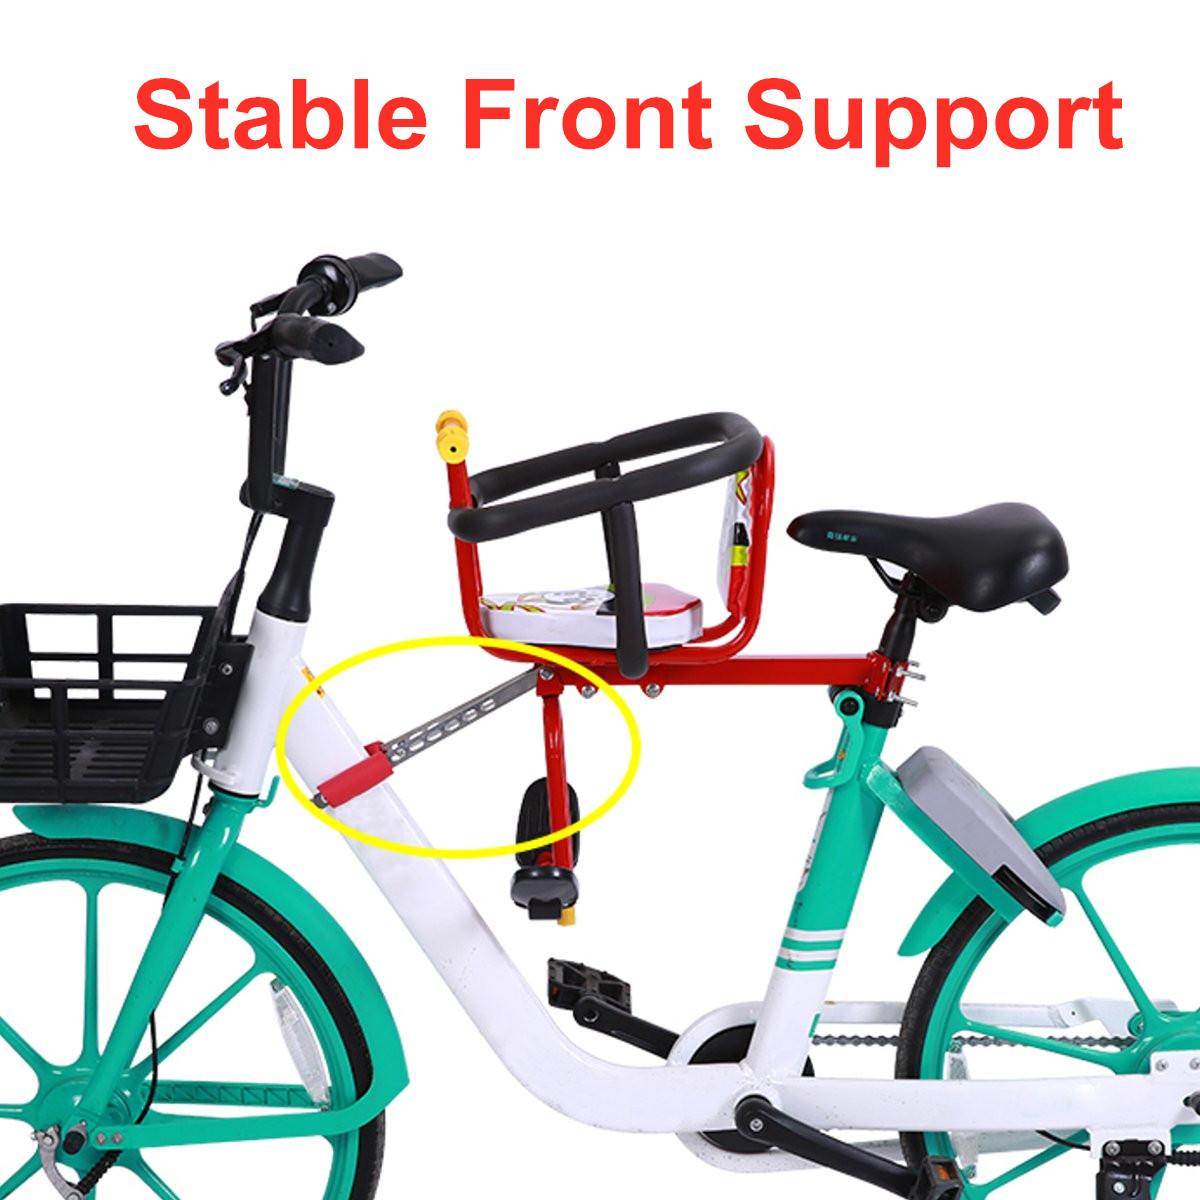 Child-Bicycle-Seat-Safety-Kids-Front-Baby-Saddle-Cushion-Bike-Carrier-Handrails-1768913-4